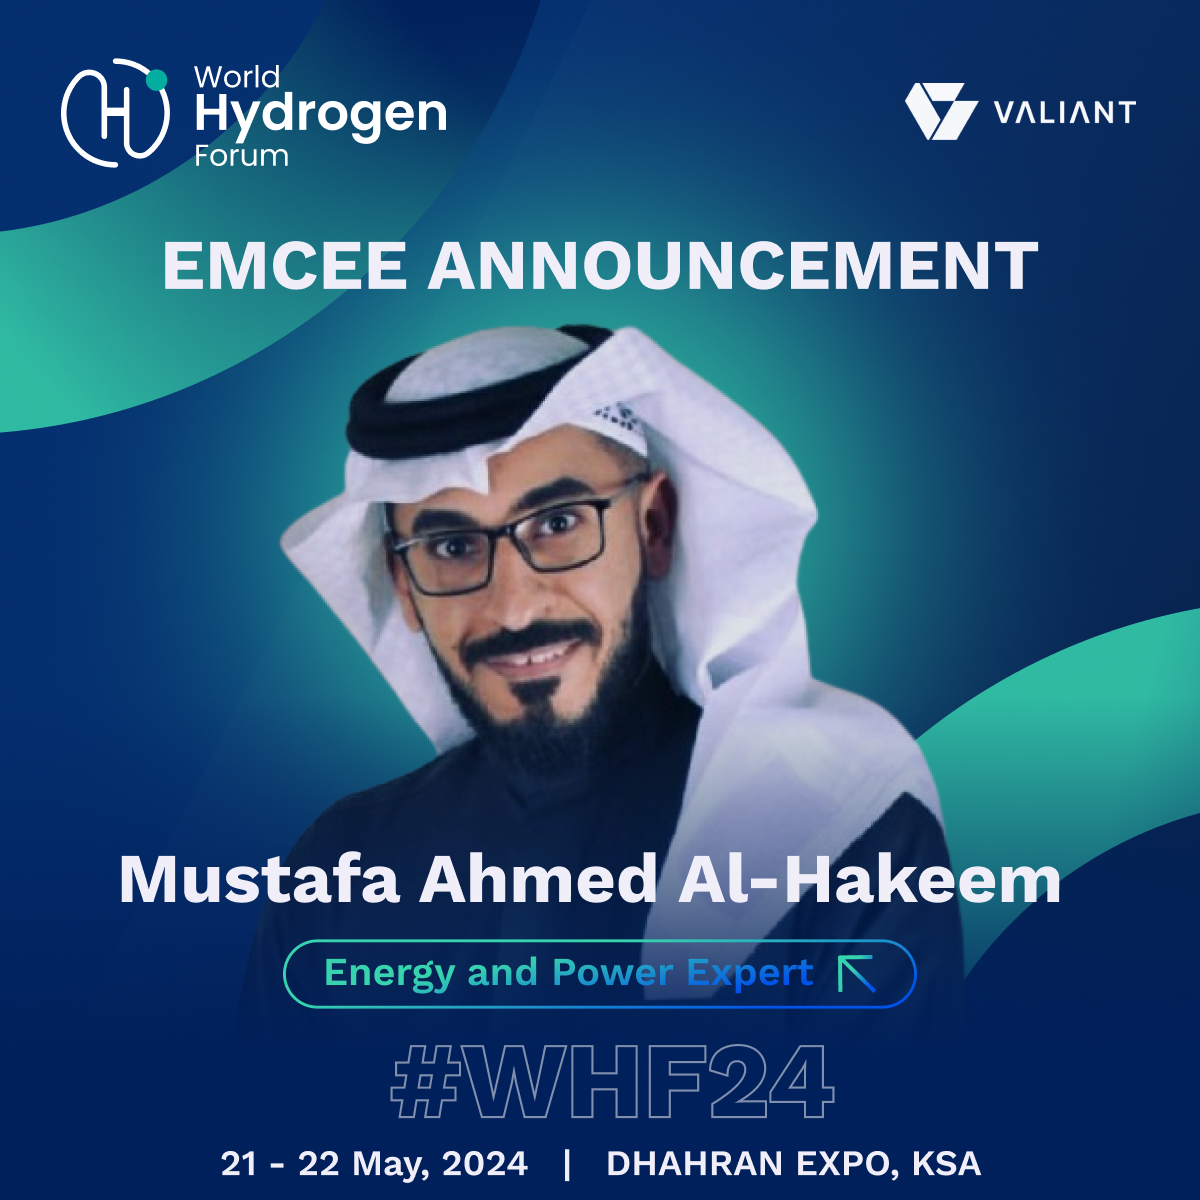 We are thrilled to announce that Mustafa Ahmed Al-Hakeem, Energy and Power Expert will be emceeing at the World Hydrogen Forum.

Register today at tinyurl.com/4mwayx9n

#whf #worldhydrogenforum #hydrogen #dhahranexpo #saudiarabia #dammam #hydrogenenergy #hydrogeneconomy